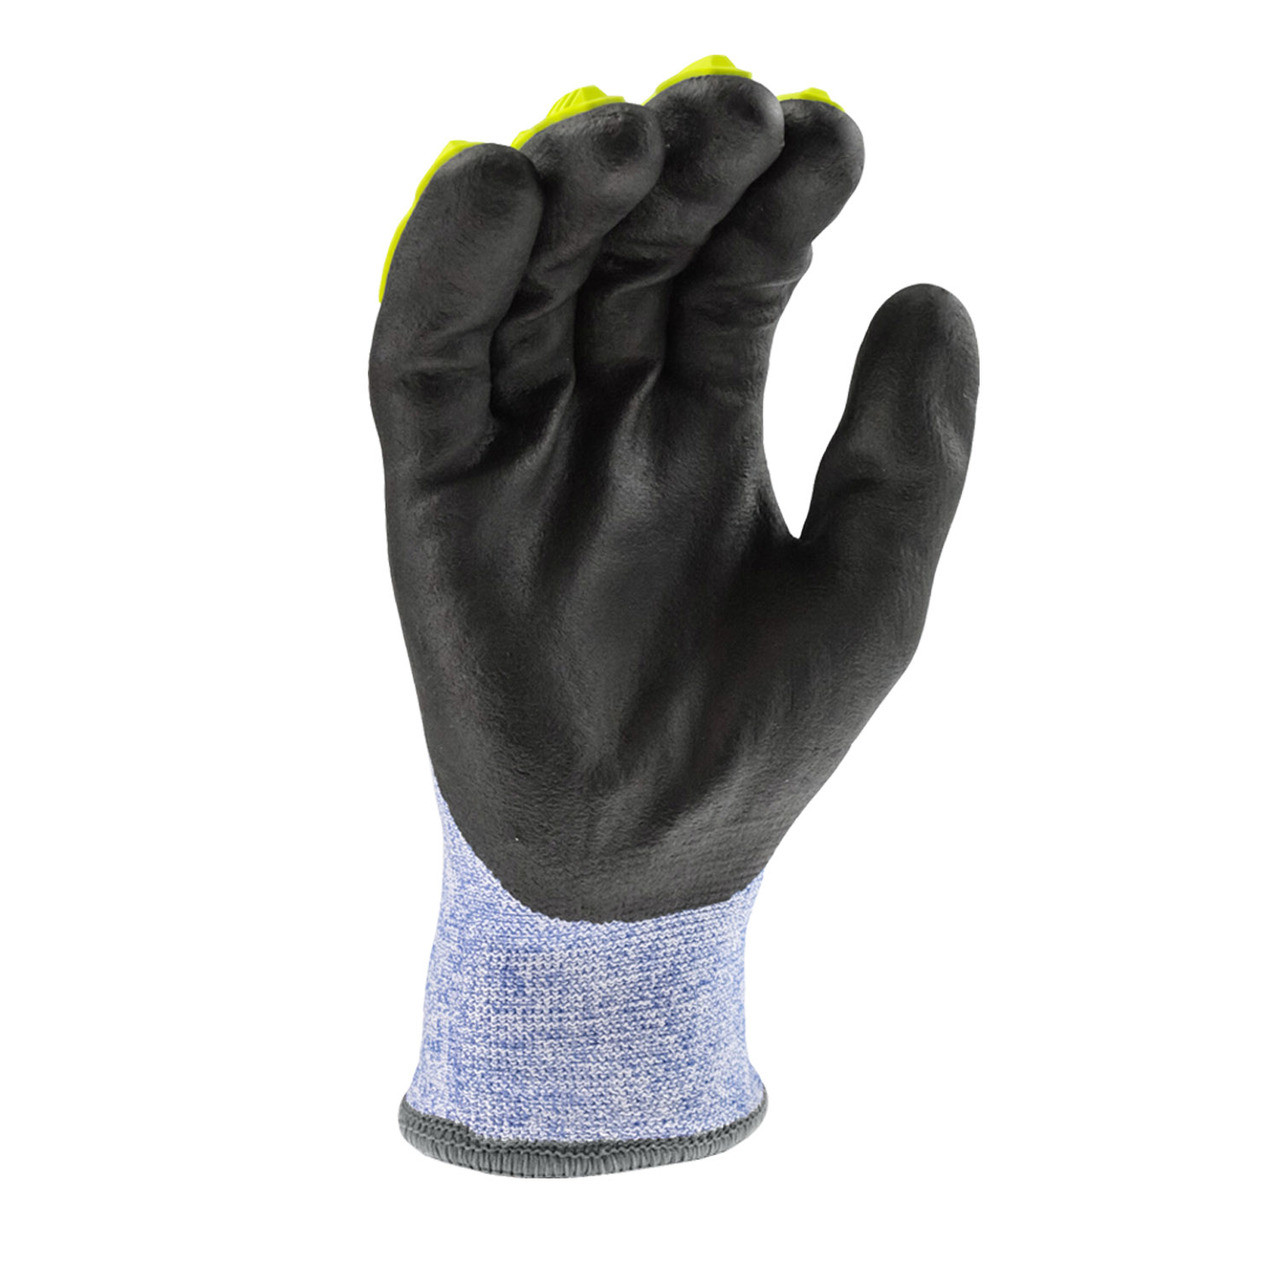 Cut Protection Level A4 Cold Weather Coated Glove